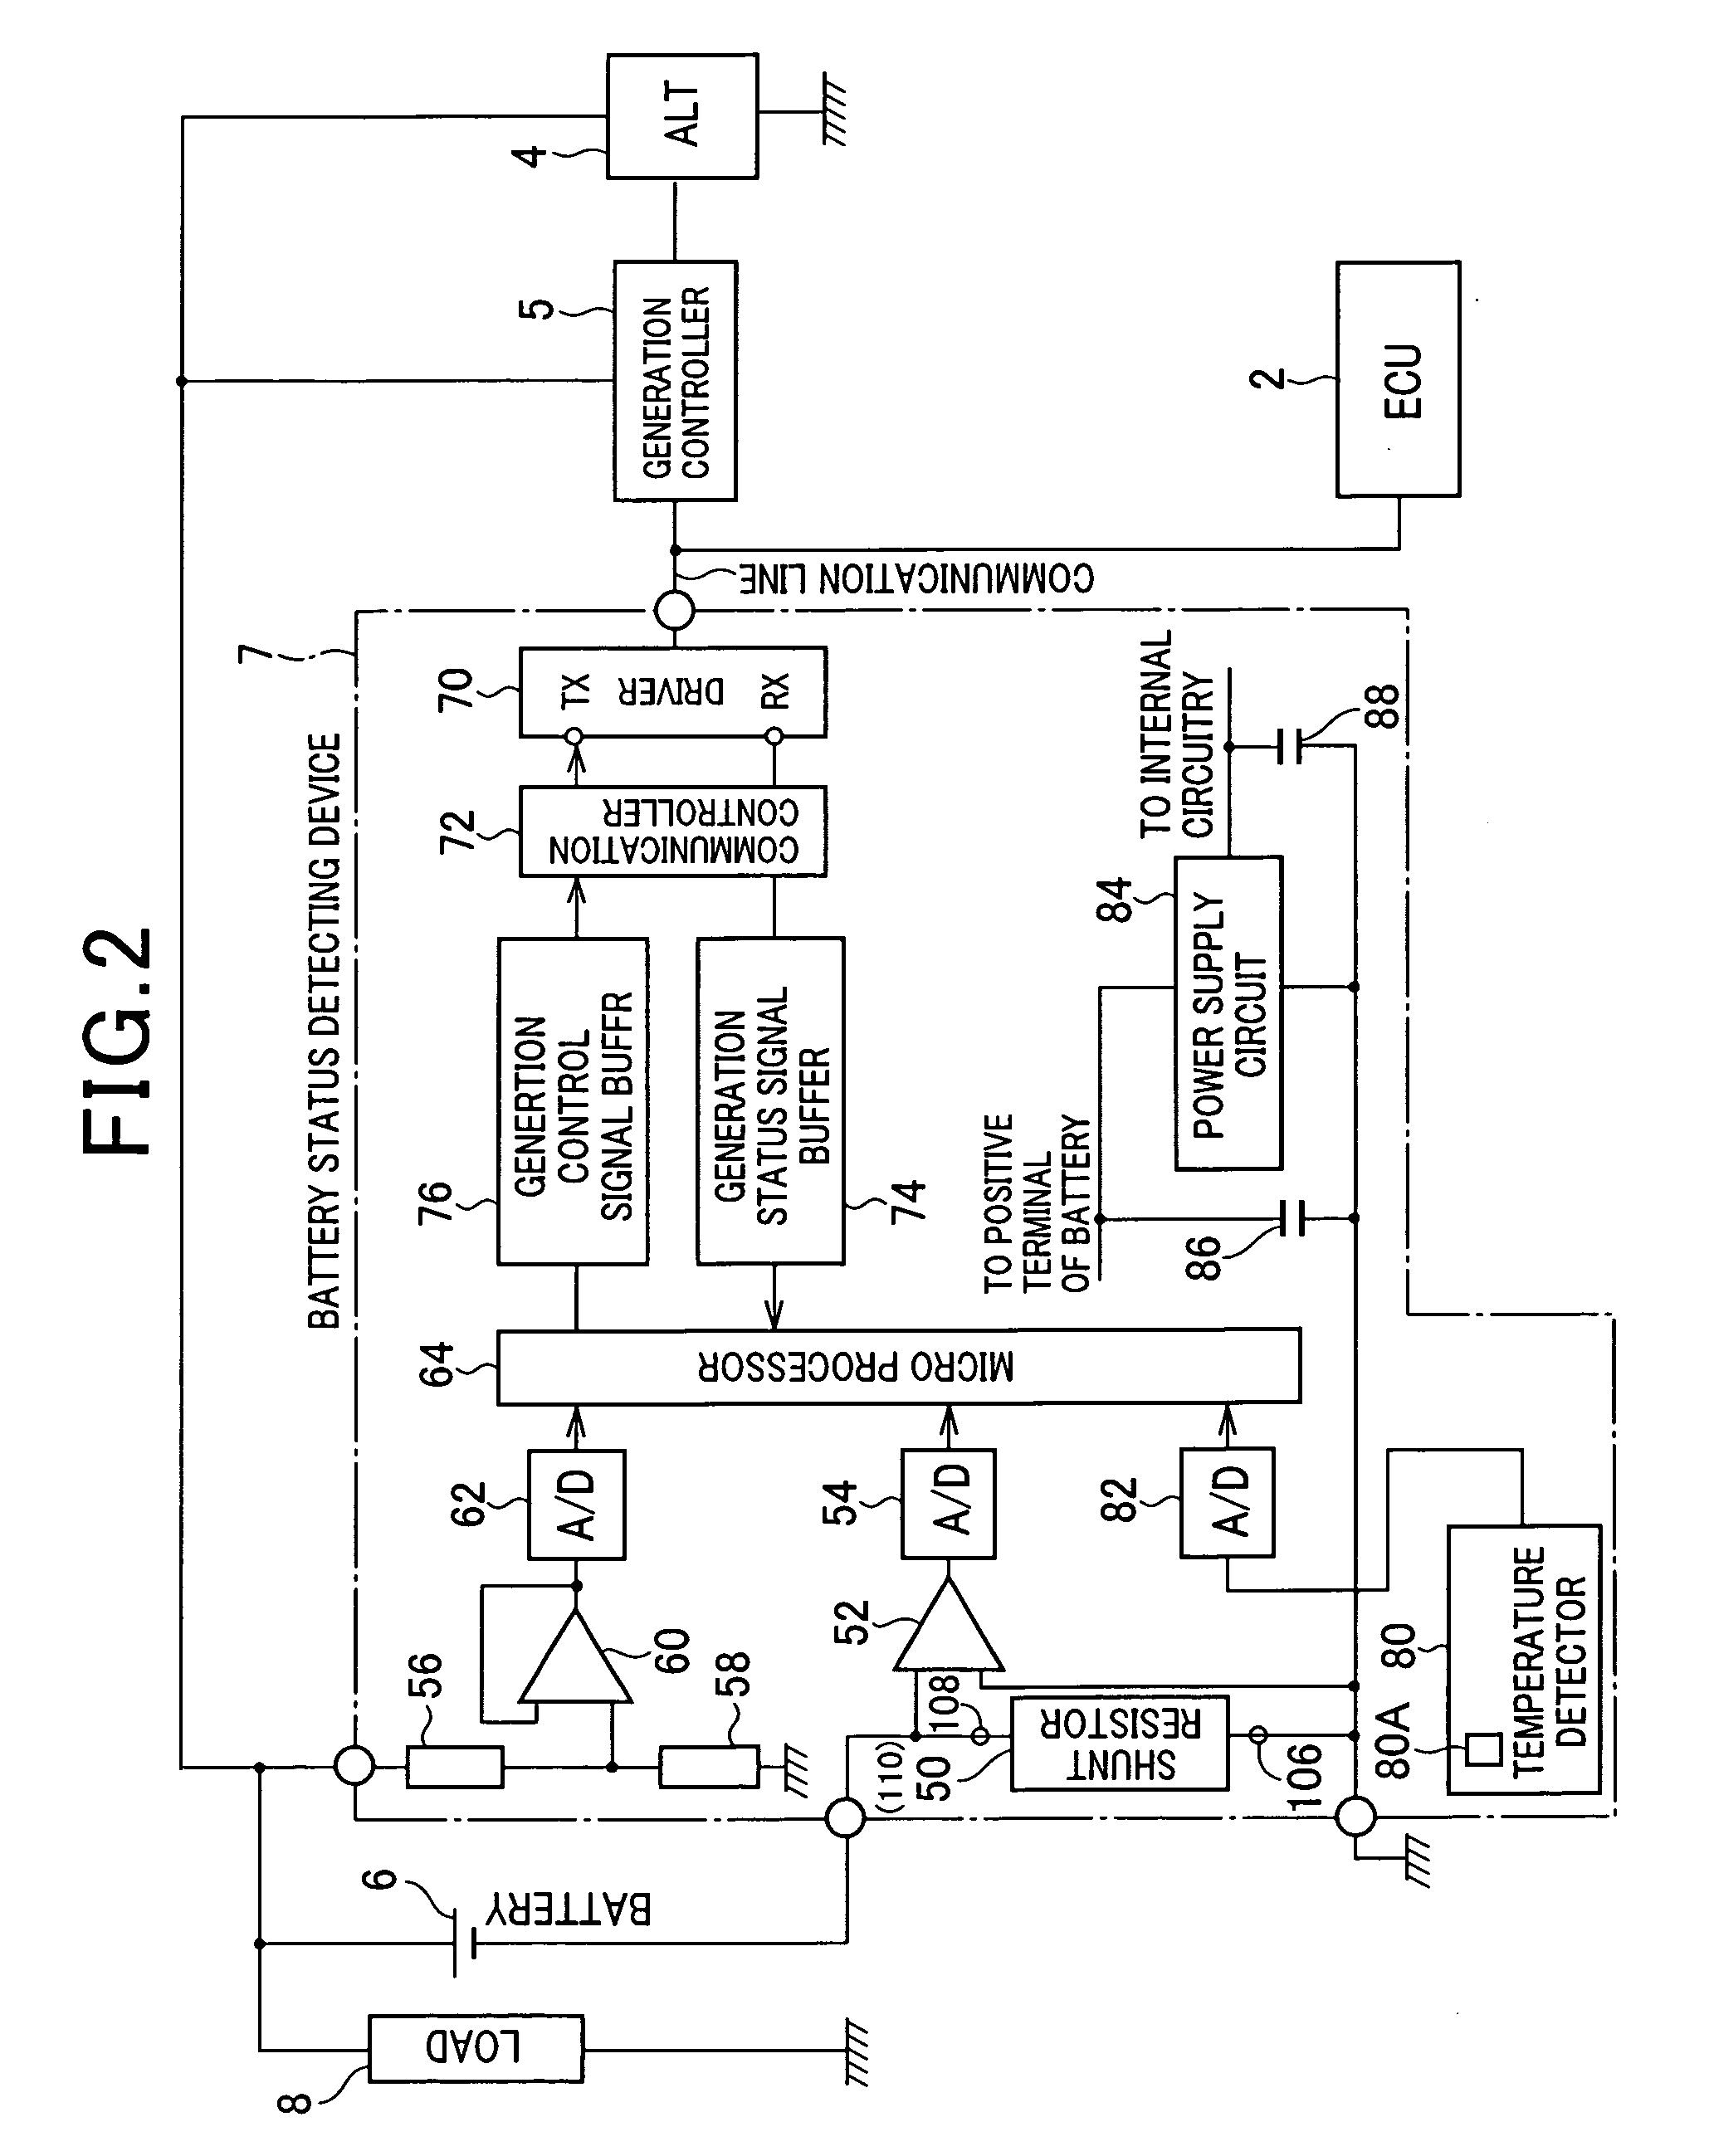 Apparatus for controlling power generated by on-vehicle generator on the basis of internal status of on-vehicle battery